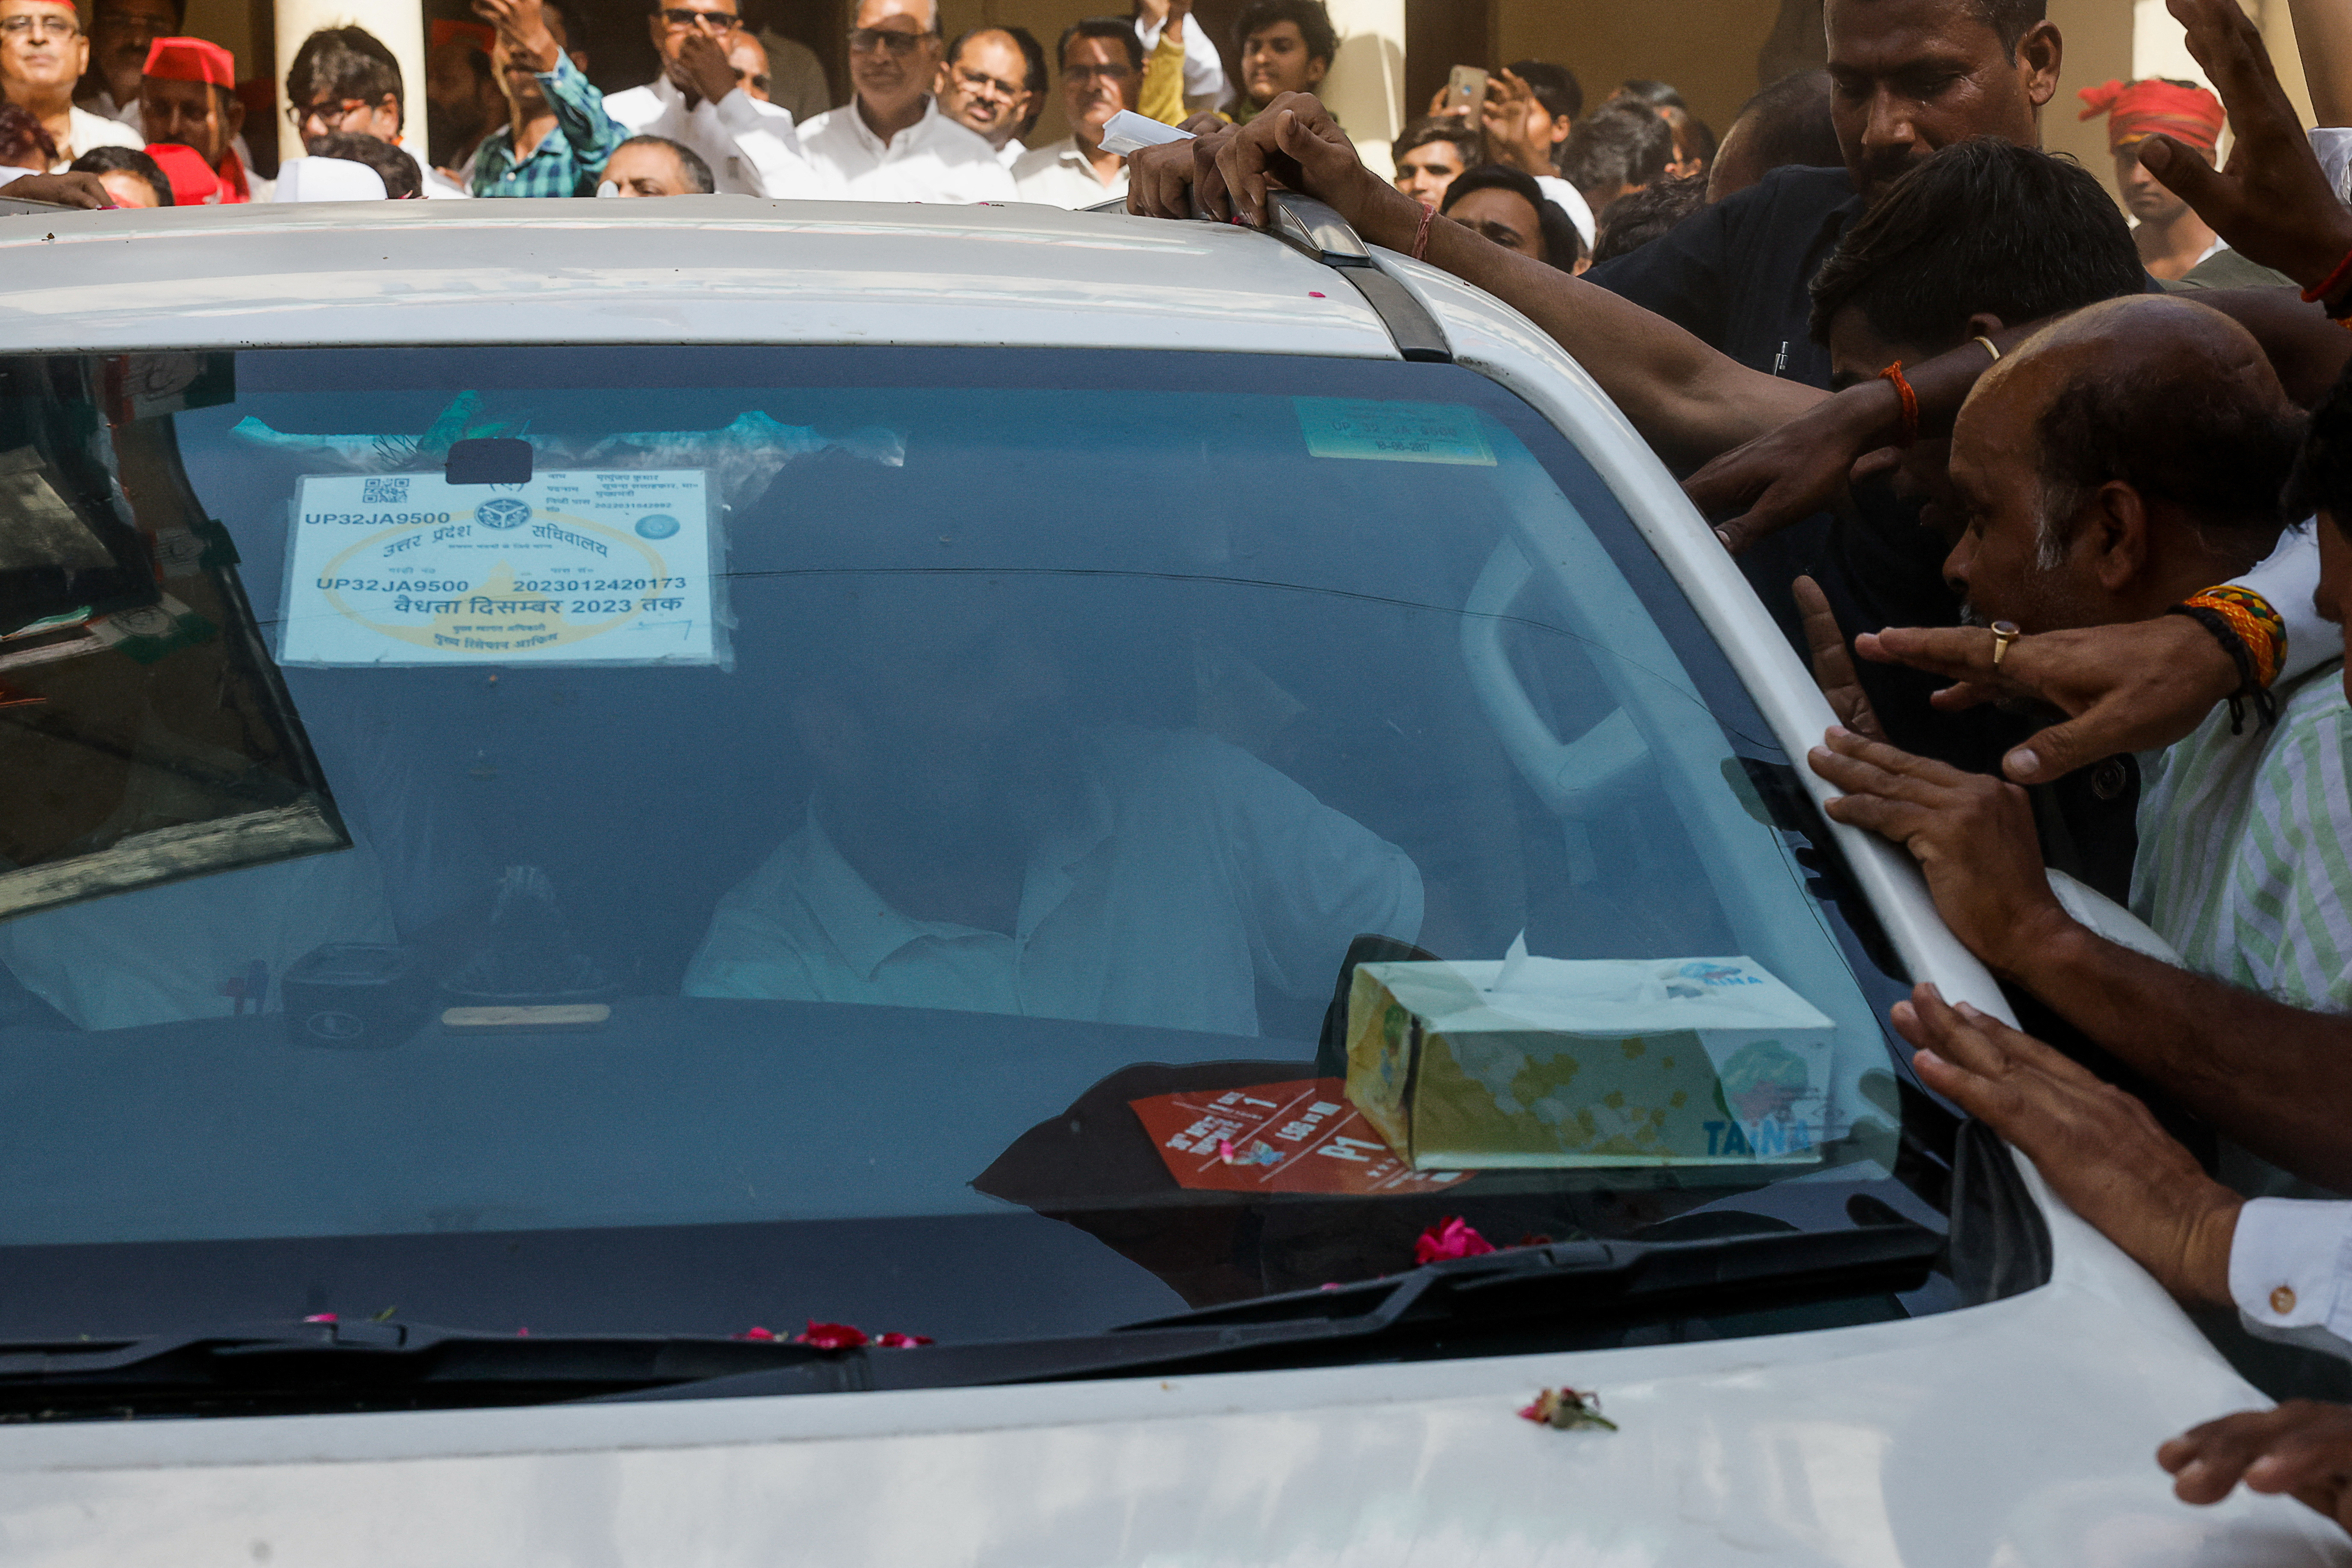 Rahul Gandhi files his nomination papers to contest the 2024 Lok Sabha election from Raebareli